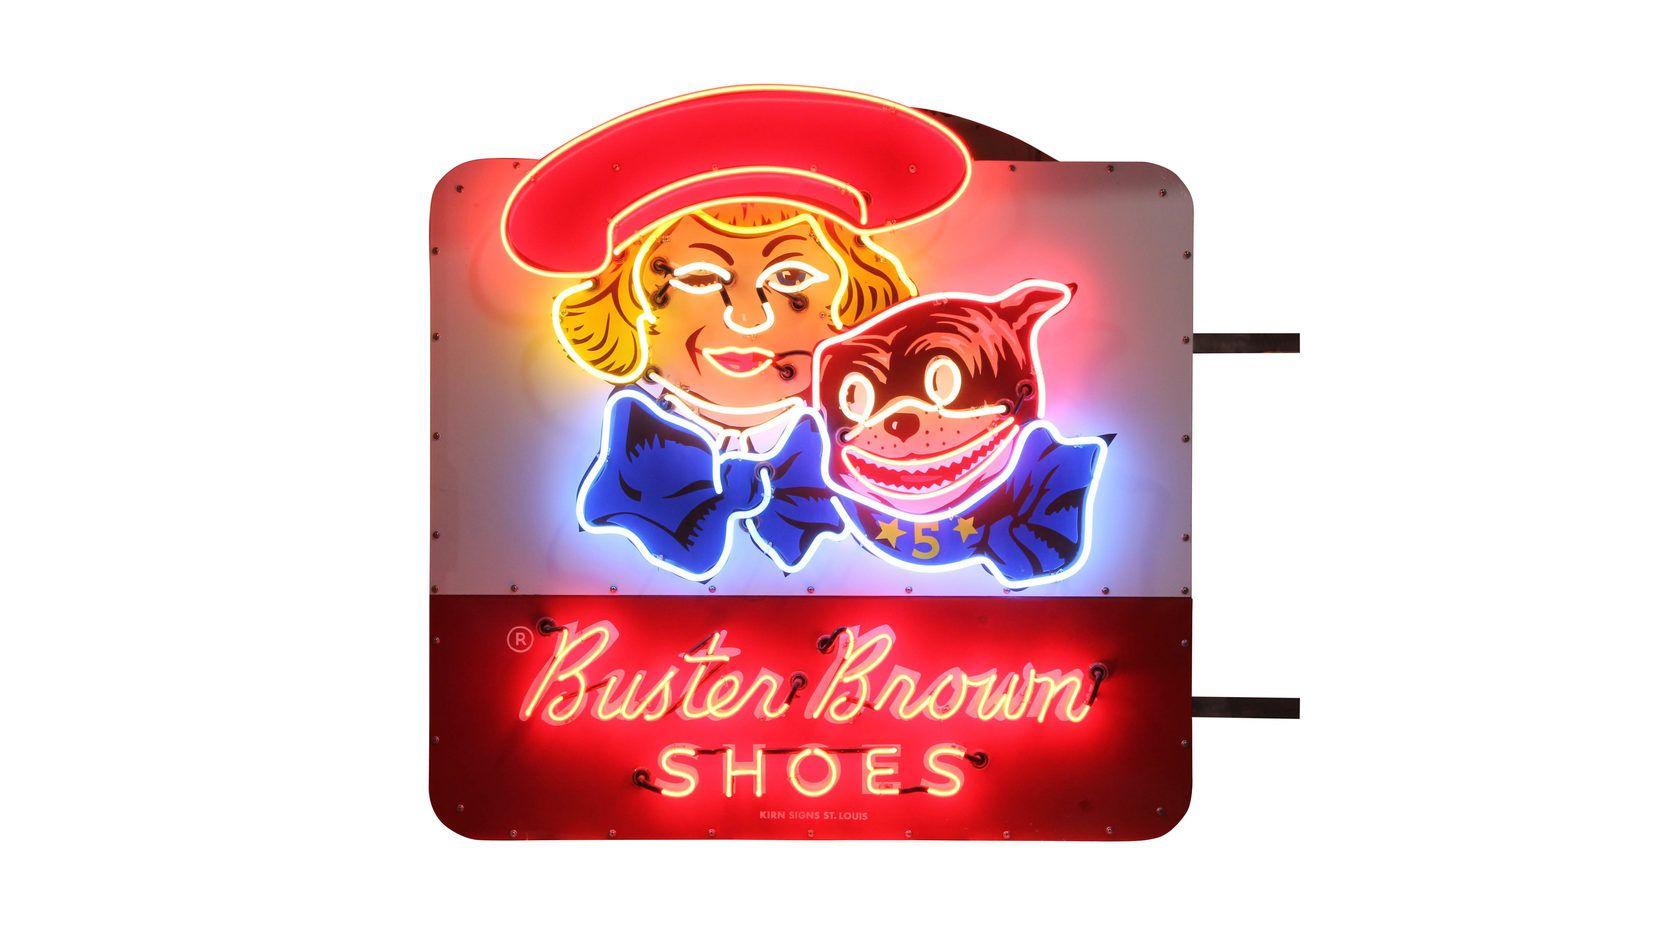 Buster Brown Logo - Buster Brown Shoes 54x53x16 | S19 | The Walker Sign Collection 2015